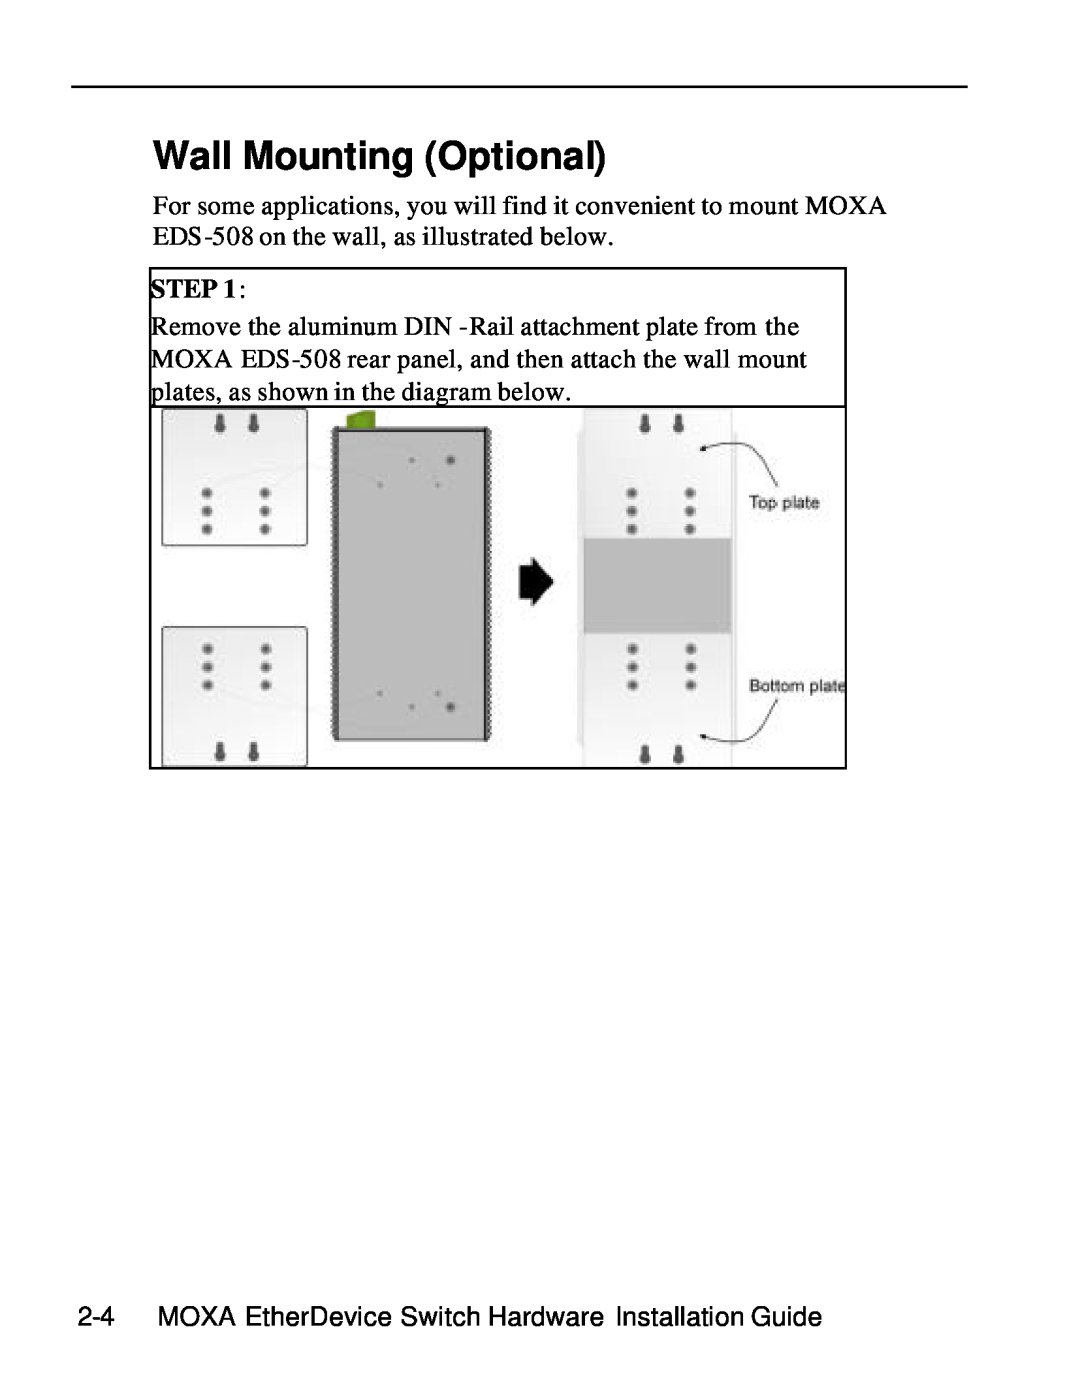 Moxa Technologies EDS-508 manual Wall Mounting Optional, MOXA EtherDevice Switch Hardware Installation Guide 